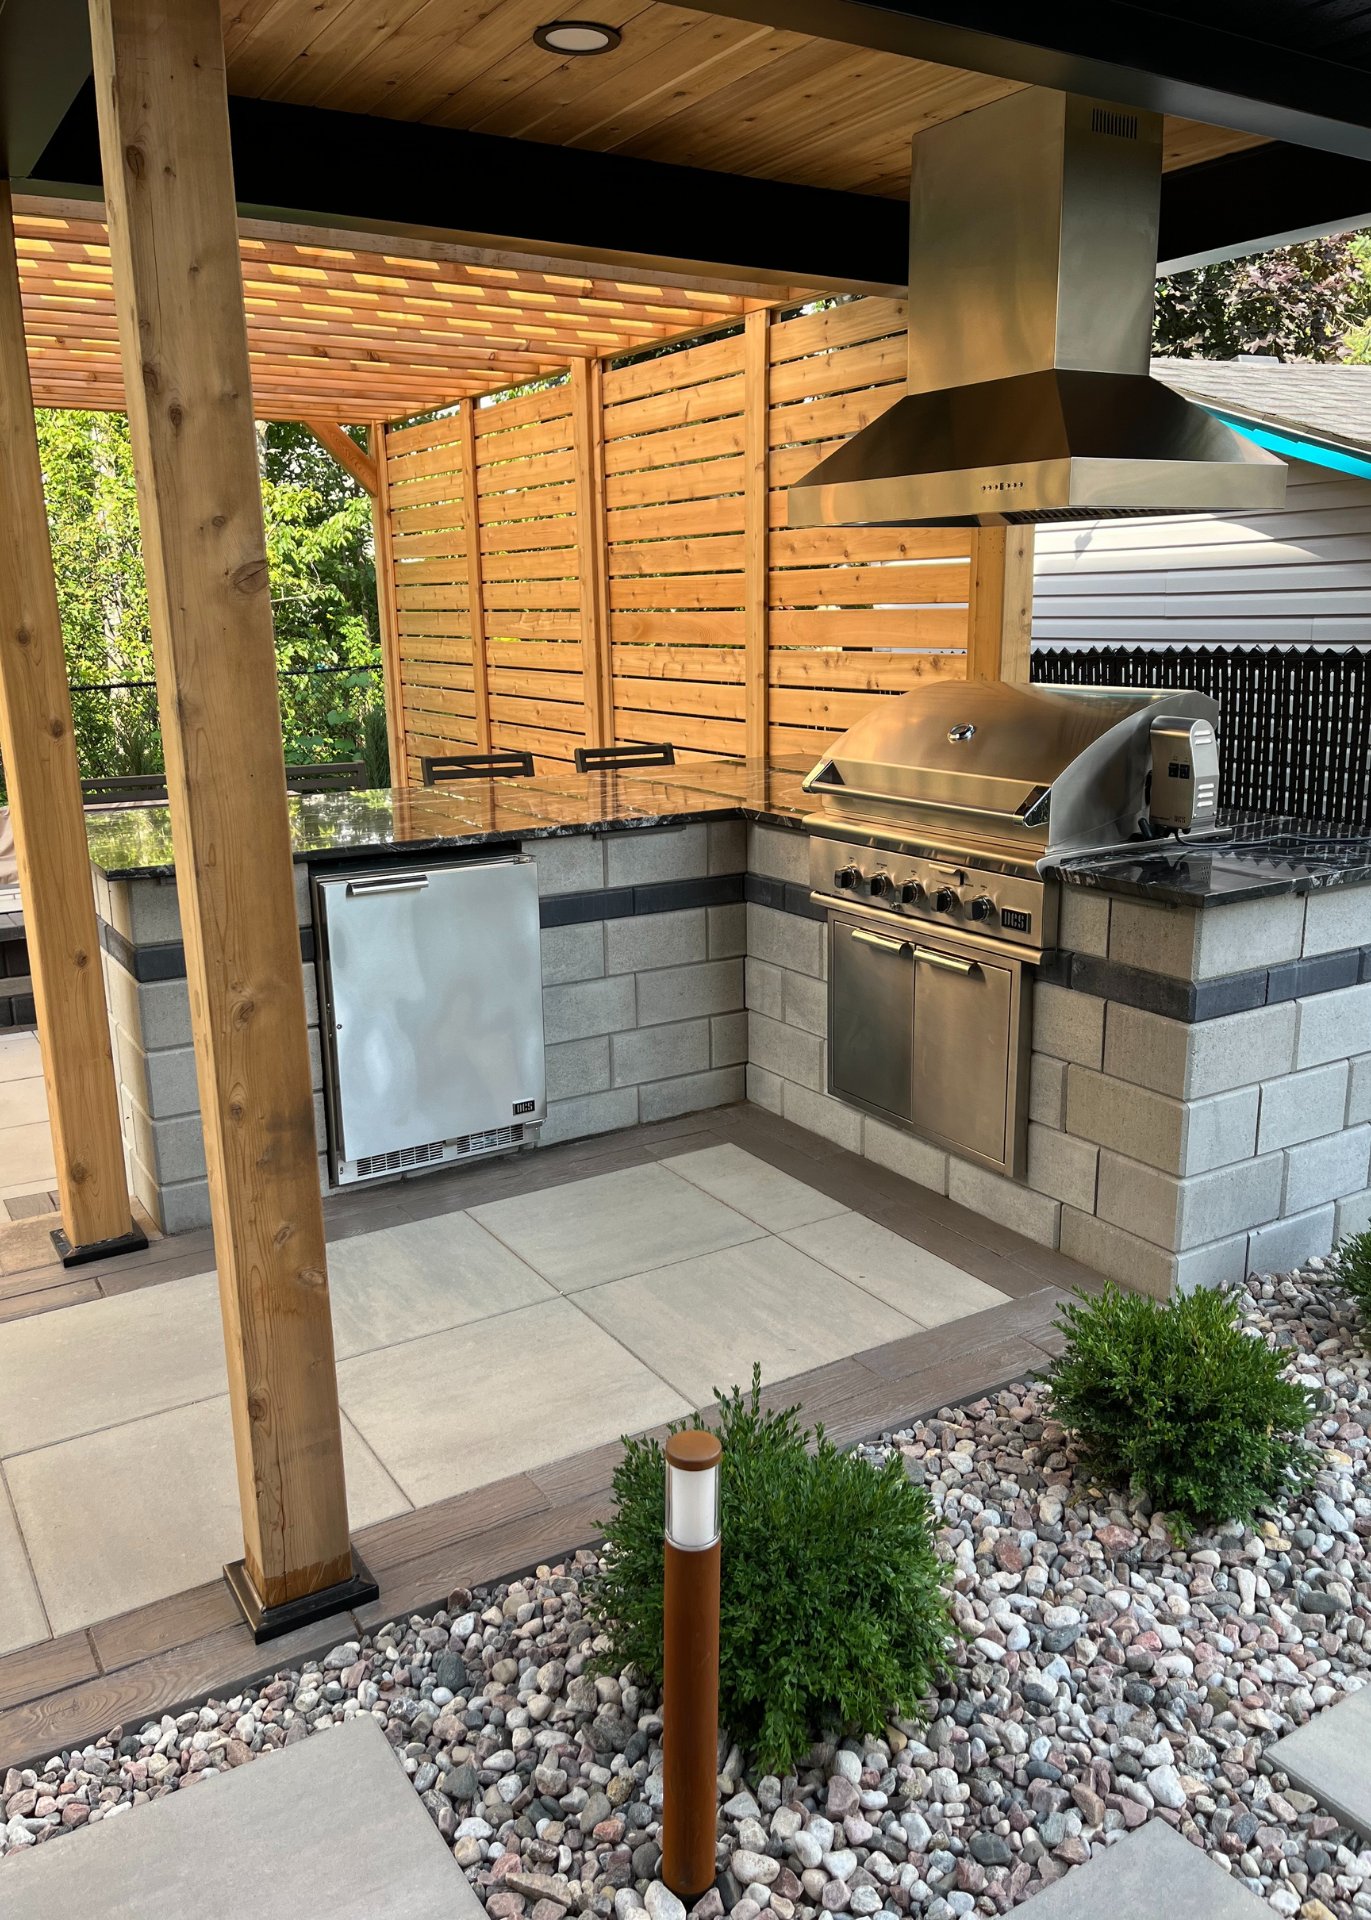 Corner of outdoor kitchen with oven, bbq and ventilation.